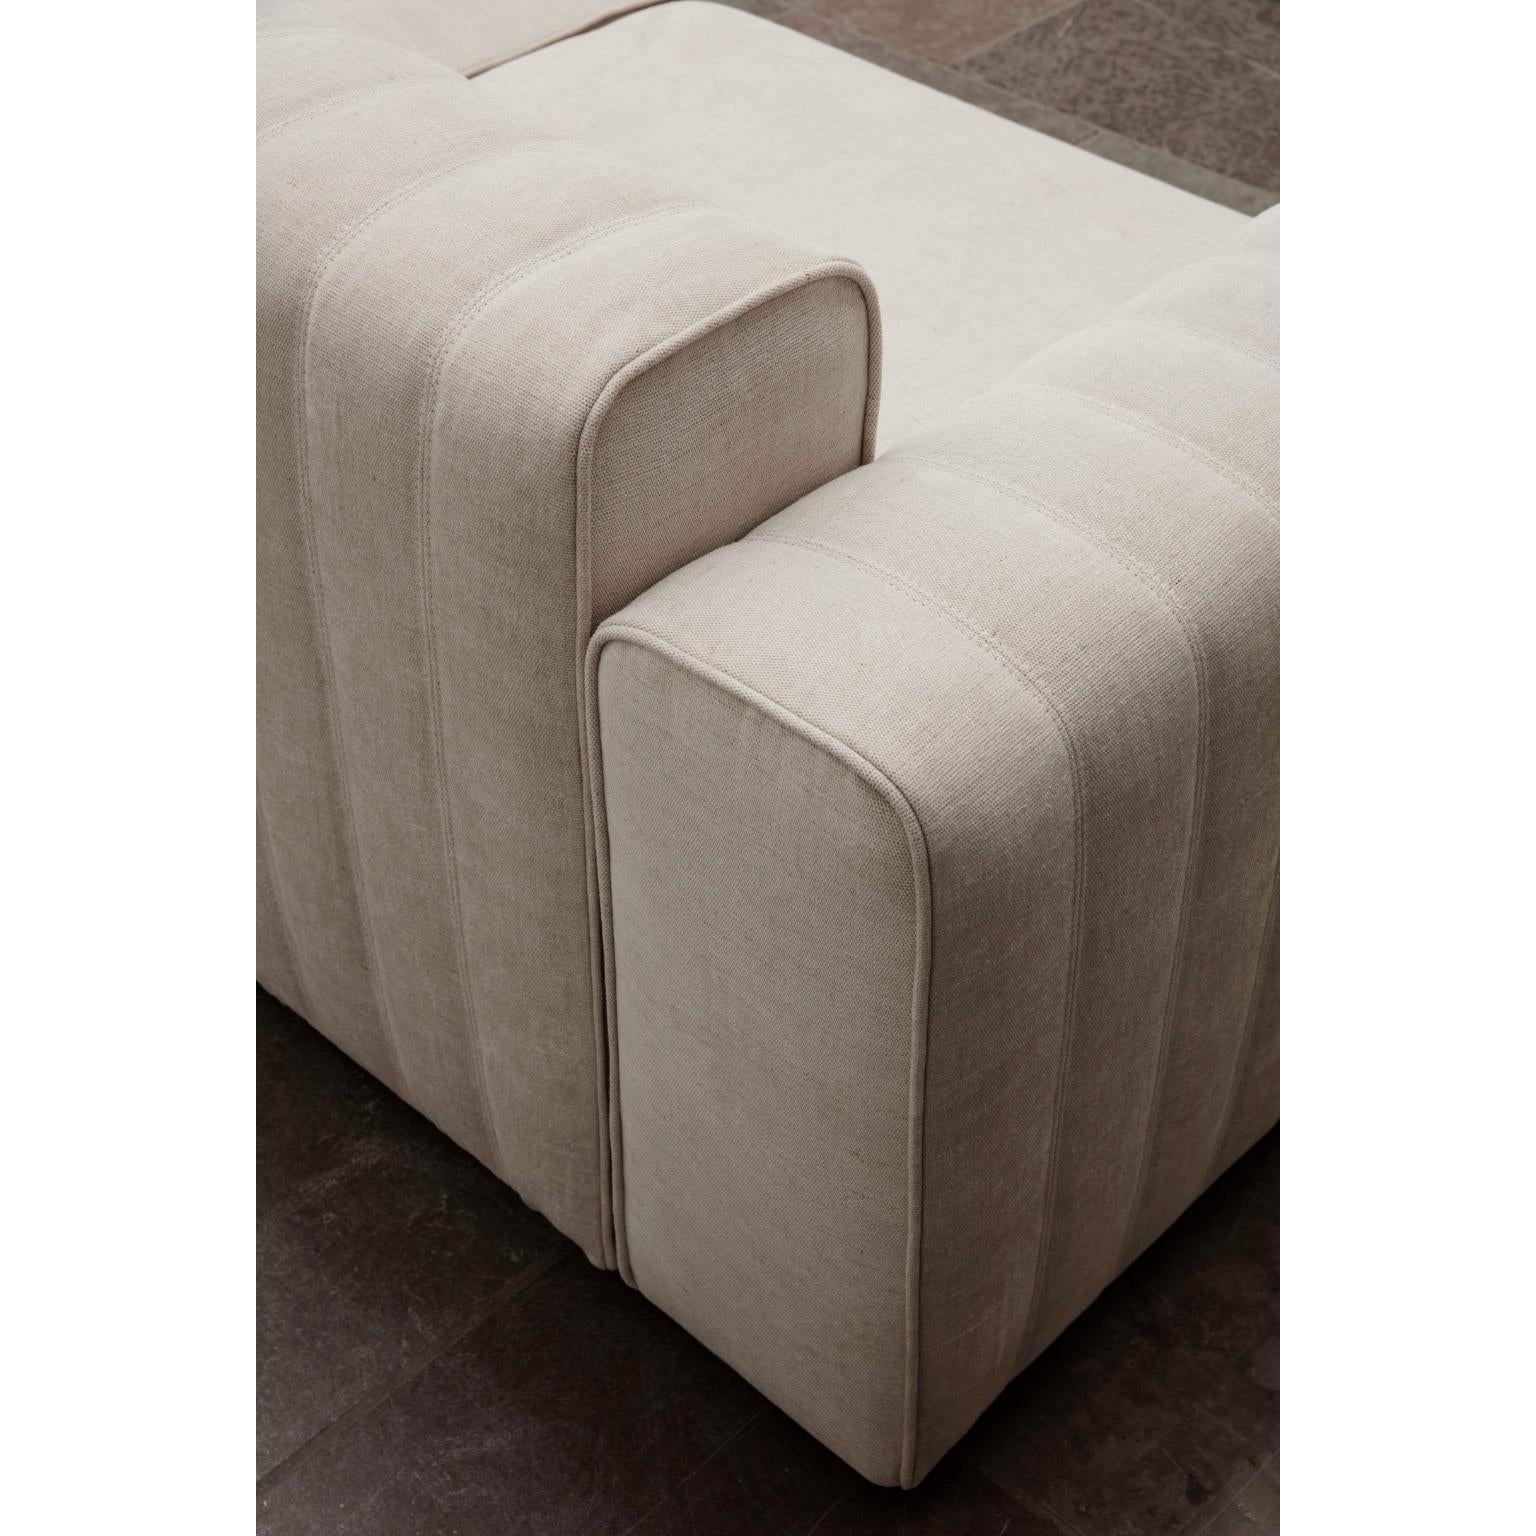 Riff Sofa by NORR11
Dimensions: D 92 x W 290 x H 70 cm. SH: 42 cm.
Materials: Foam, plywood and upholstery.
Upholstery: Barnum Boucle Color 3.

Available in a variety of fabrics and custom materials. Prices may vary. Deep seating and generous